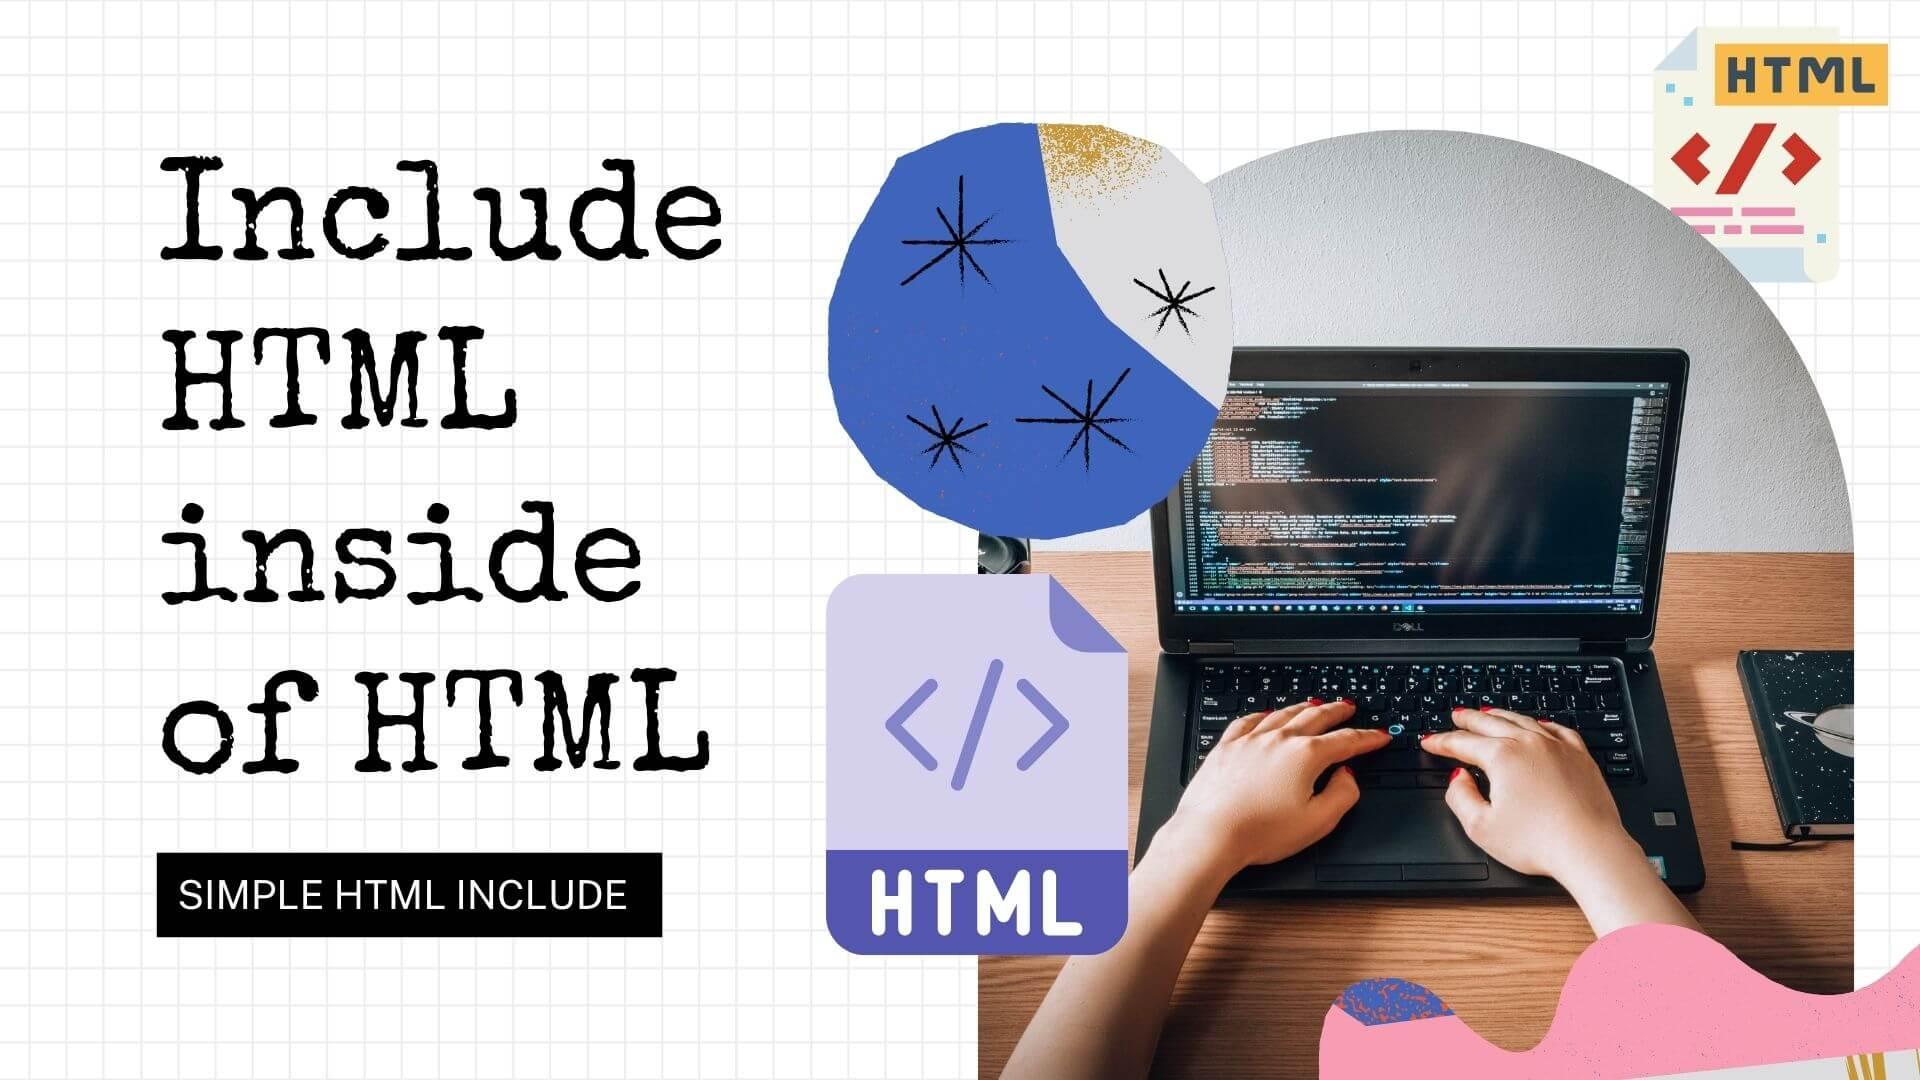 Include HTML inside of HTML